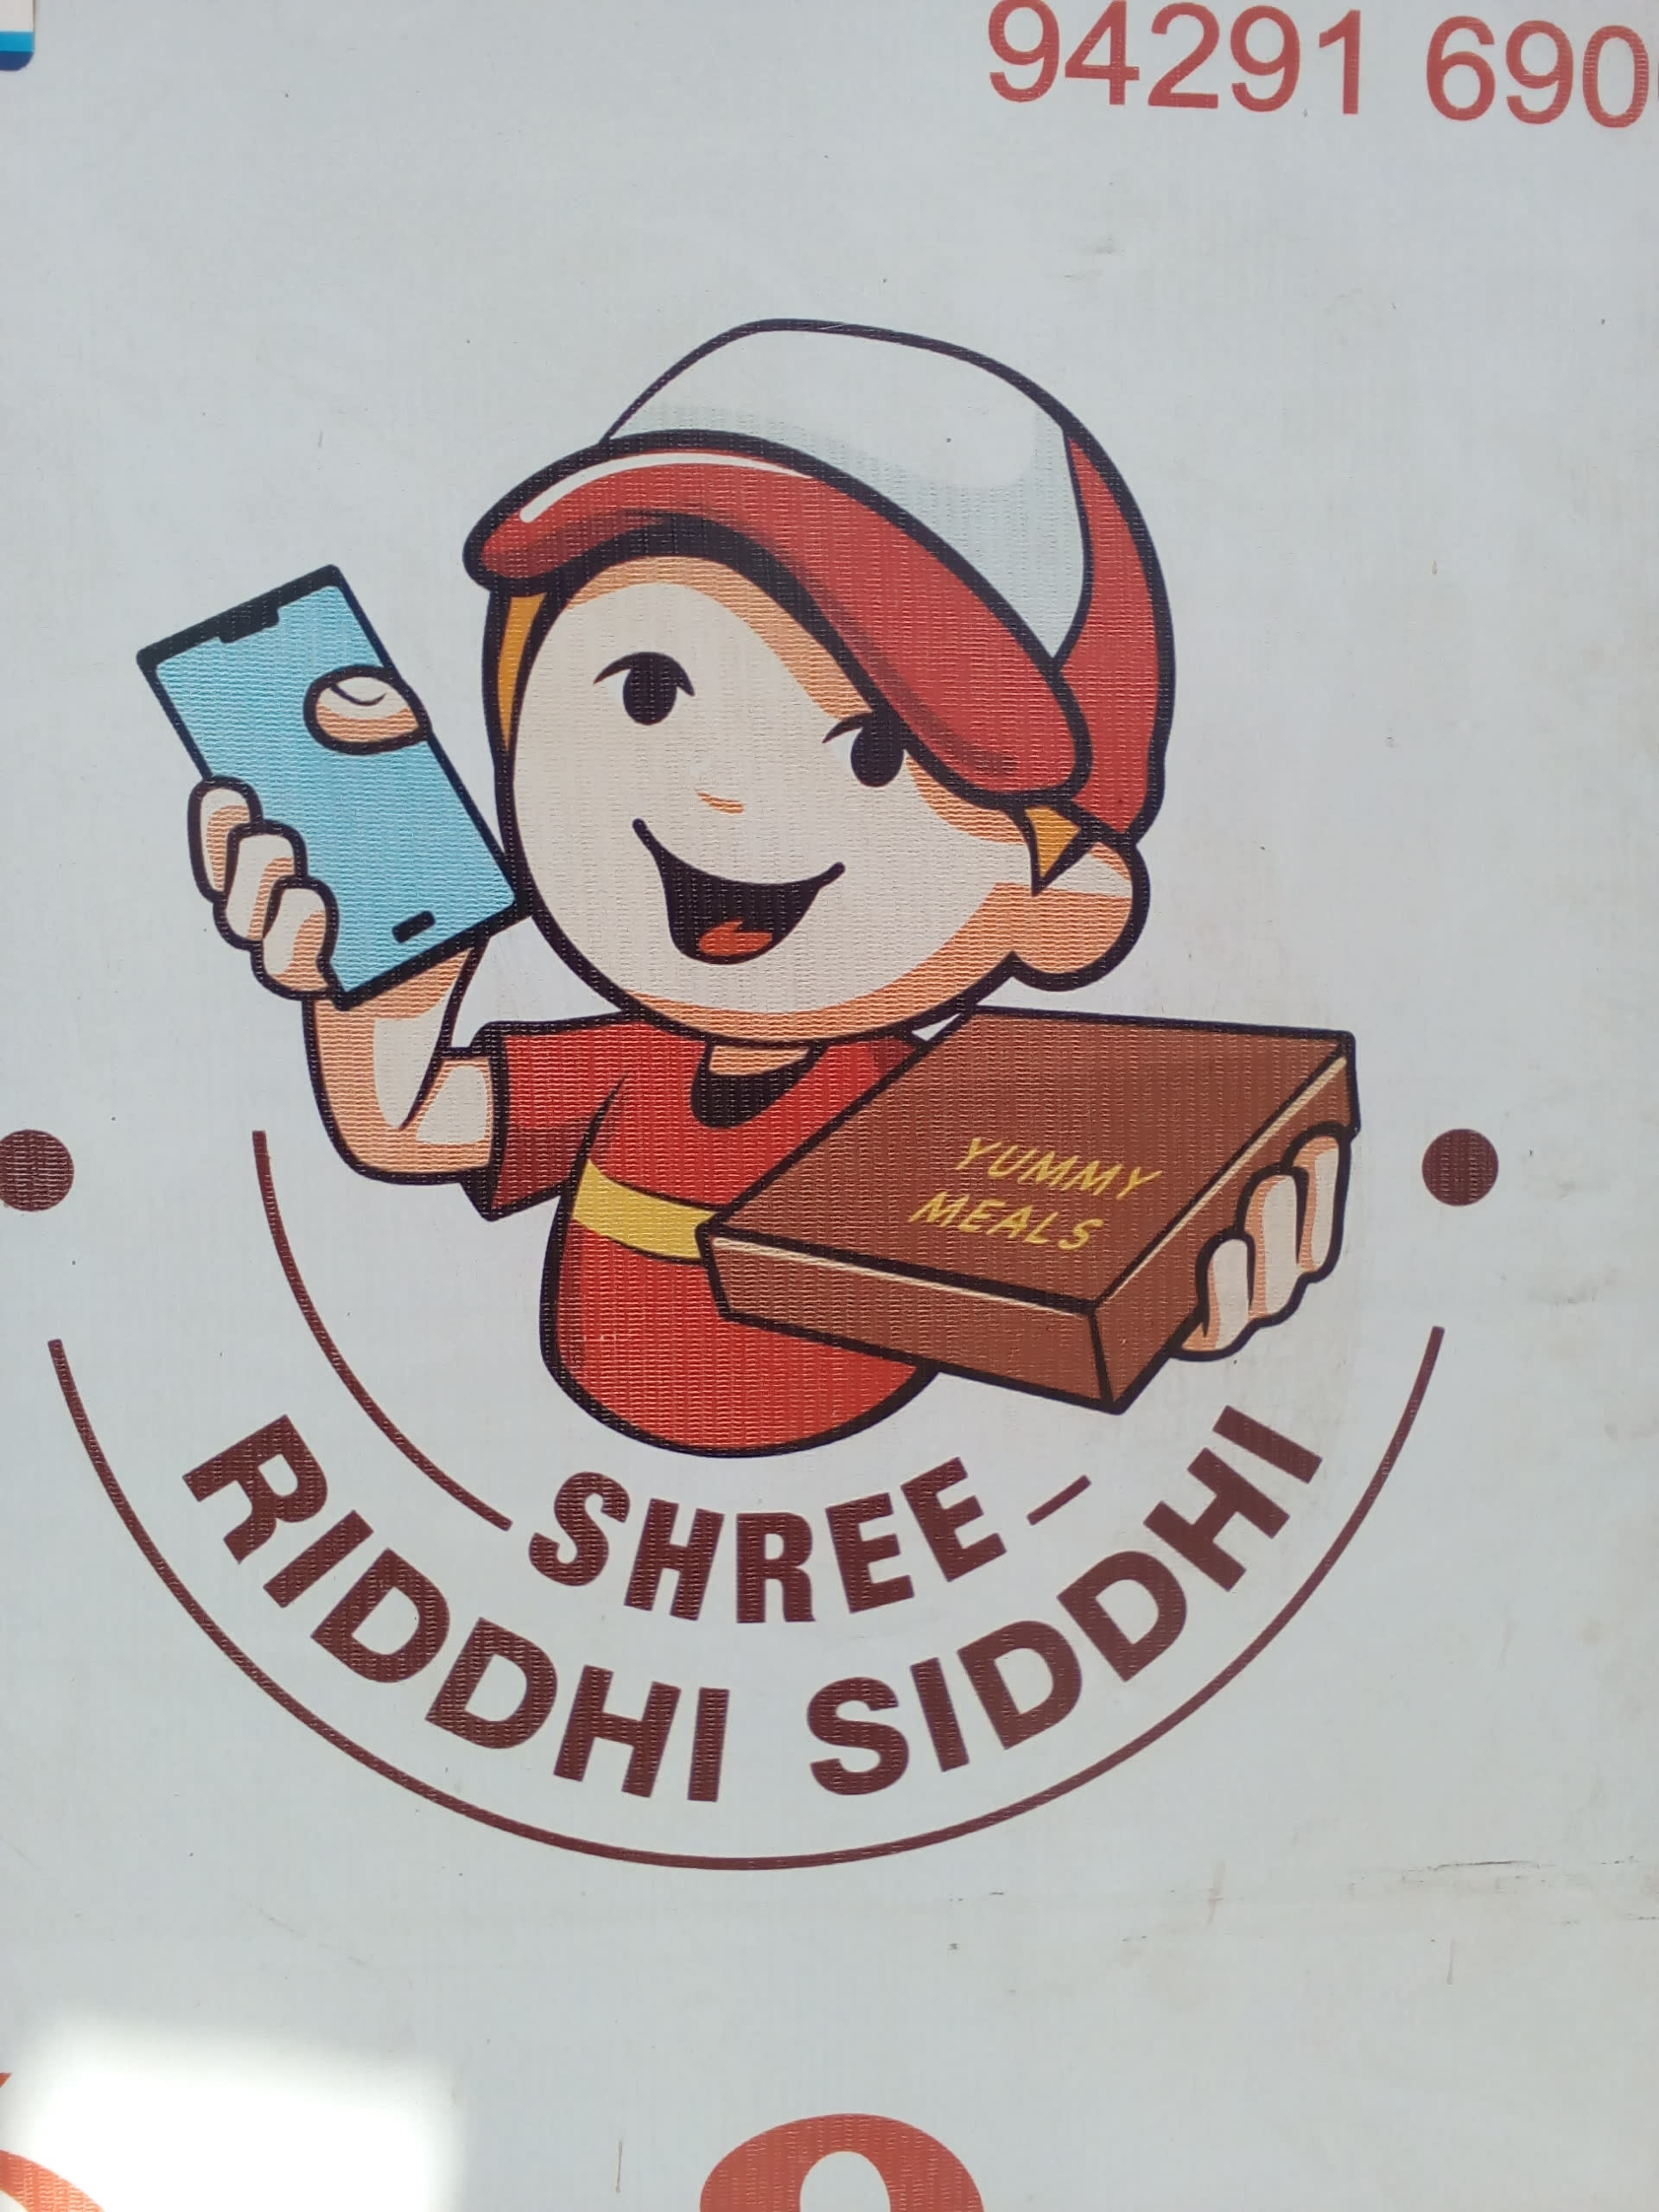 Shree Riddhi Siddhi food parcel and catering